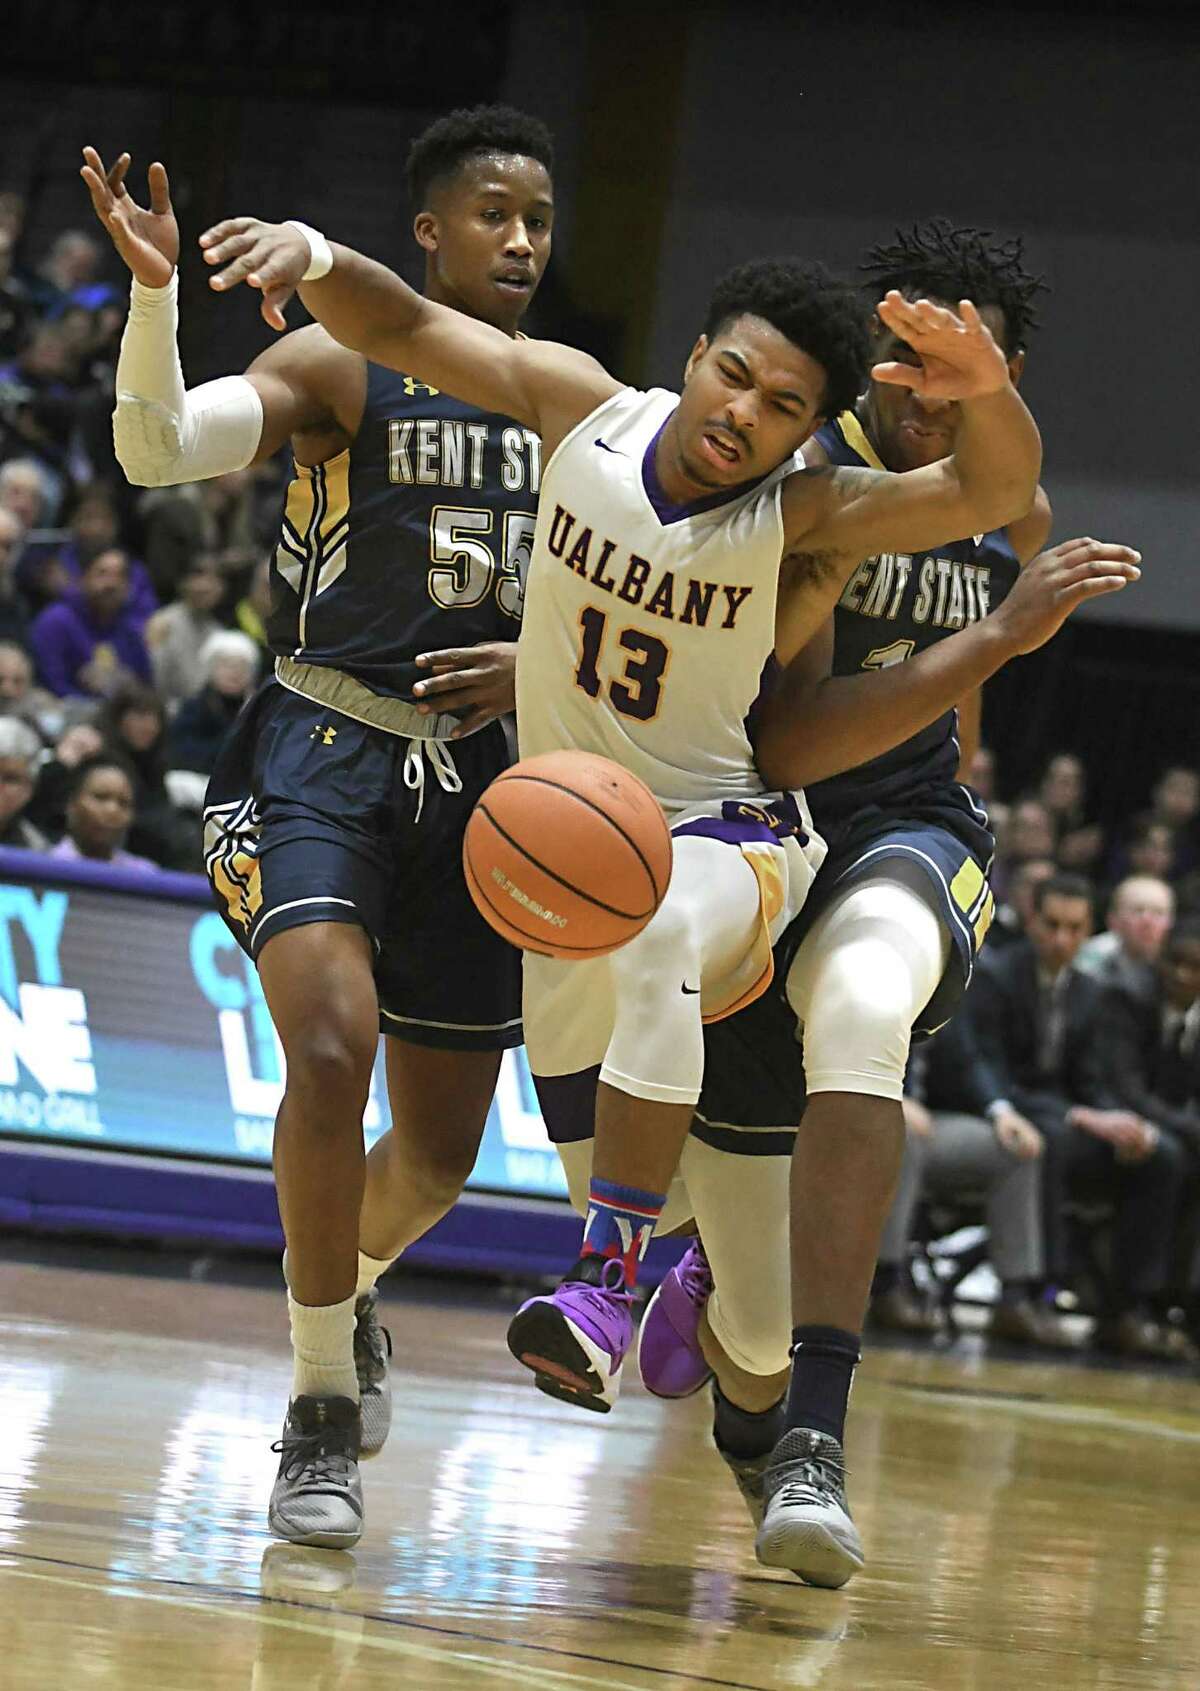 University at Albany's David Nichols loses the ball as he is guarded by Kent State's Kevin Zabo, left, and Adonis De La Rosa during a basketball game at SEFCU Arena on Thursday, Dec. 28, 2017 in Albany, N.Y. (Lori Van Buren / Times Union)